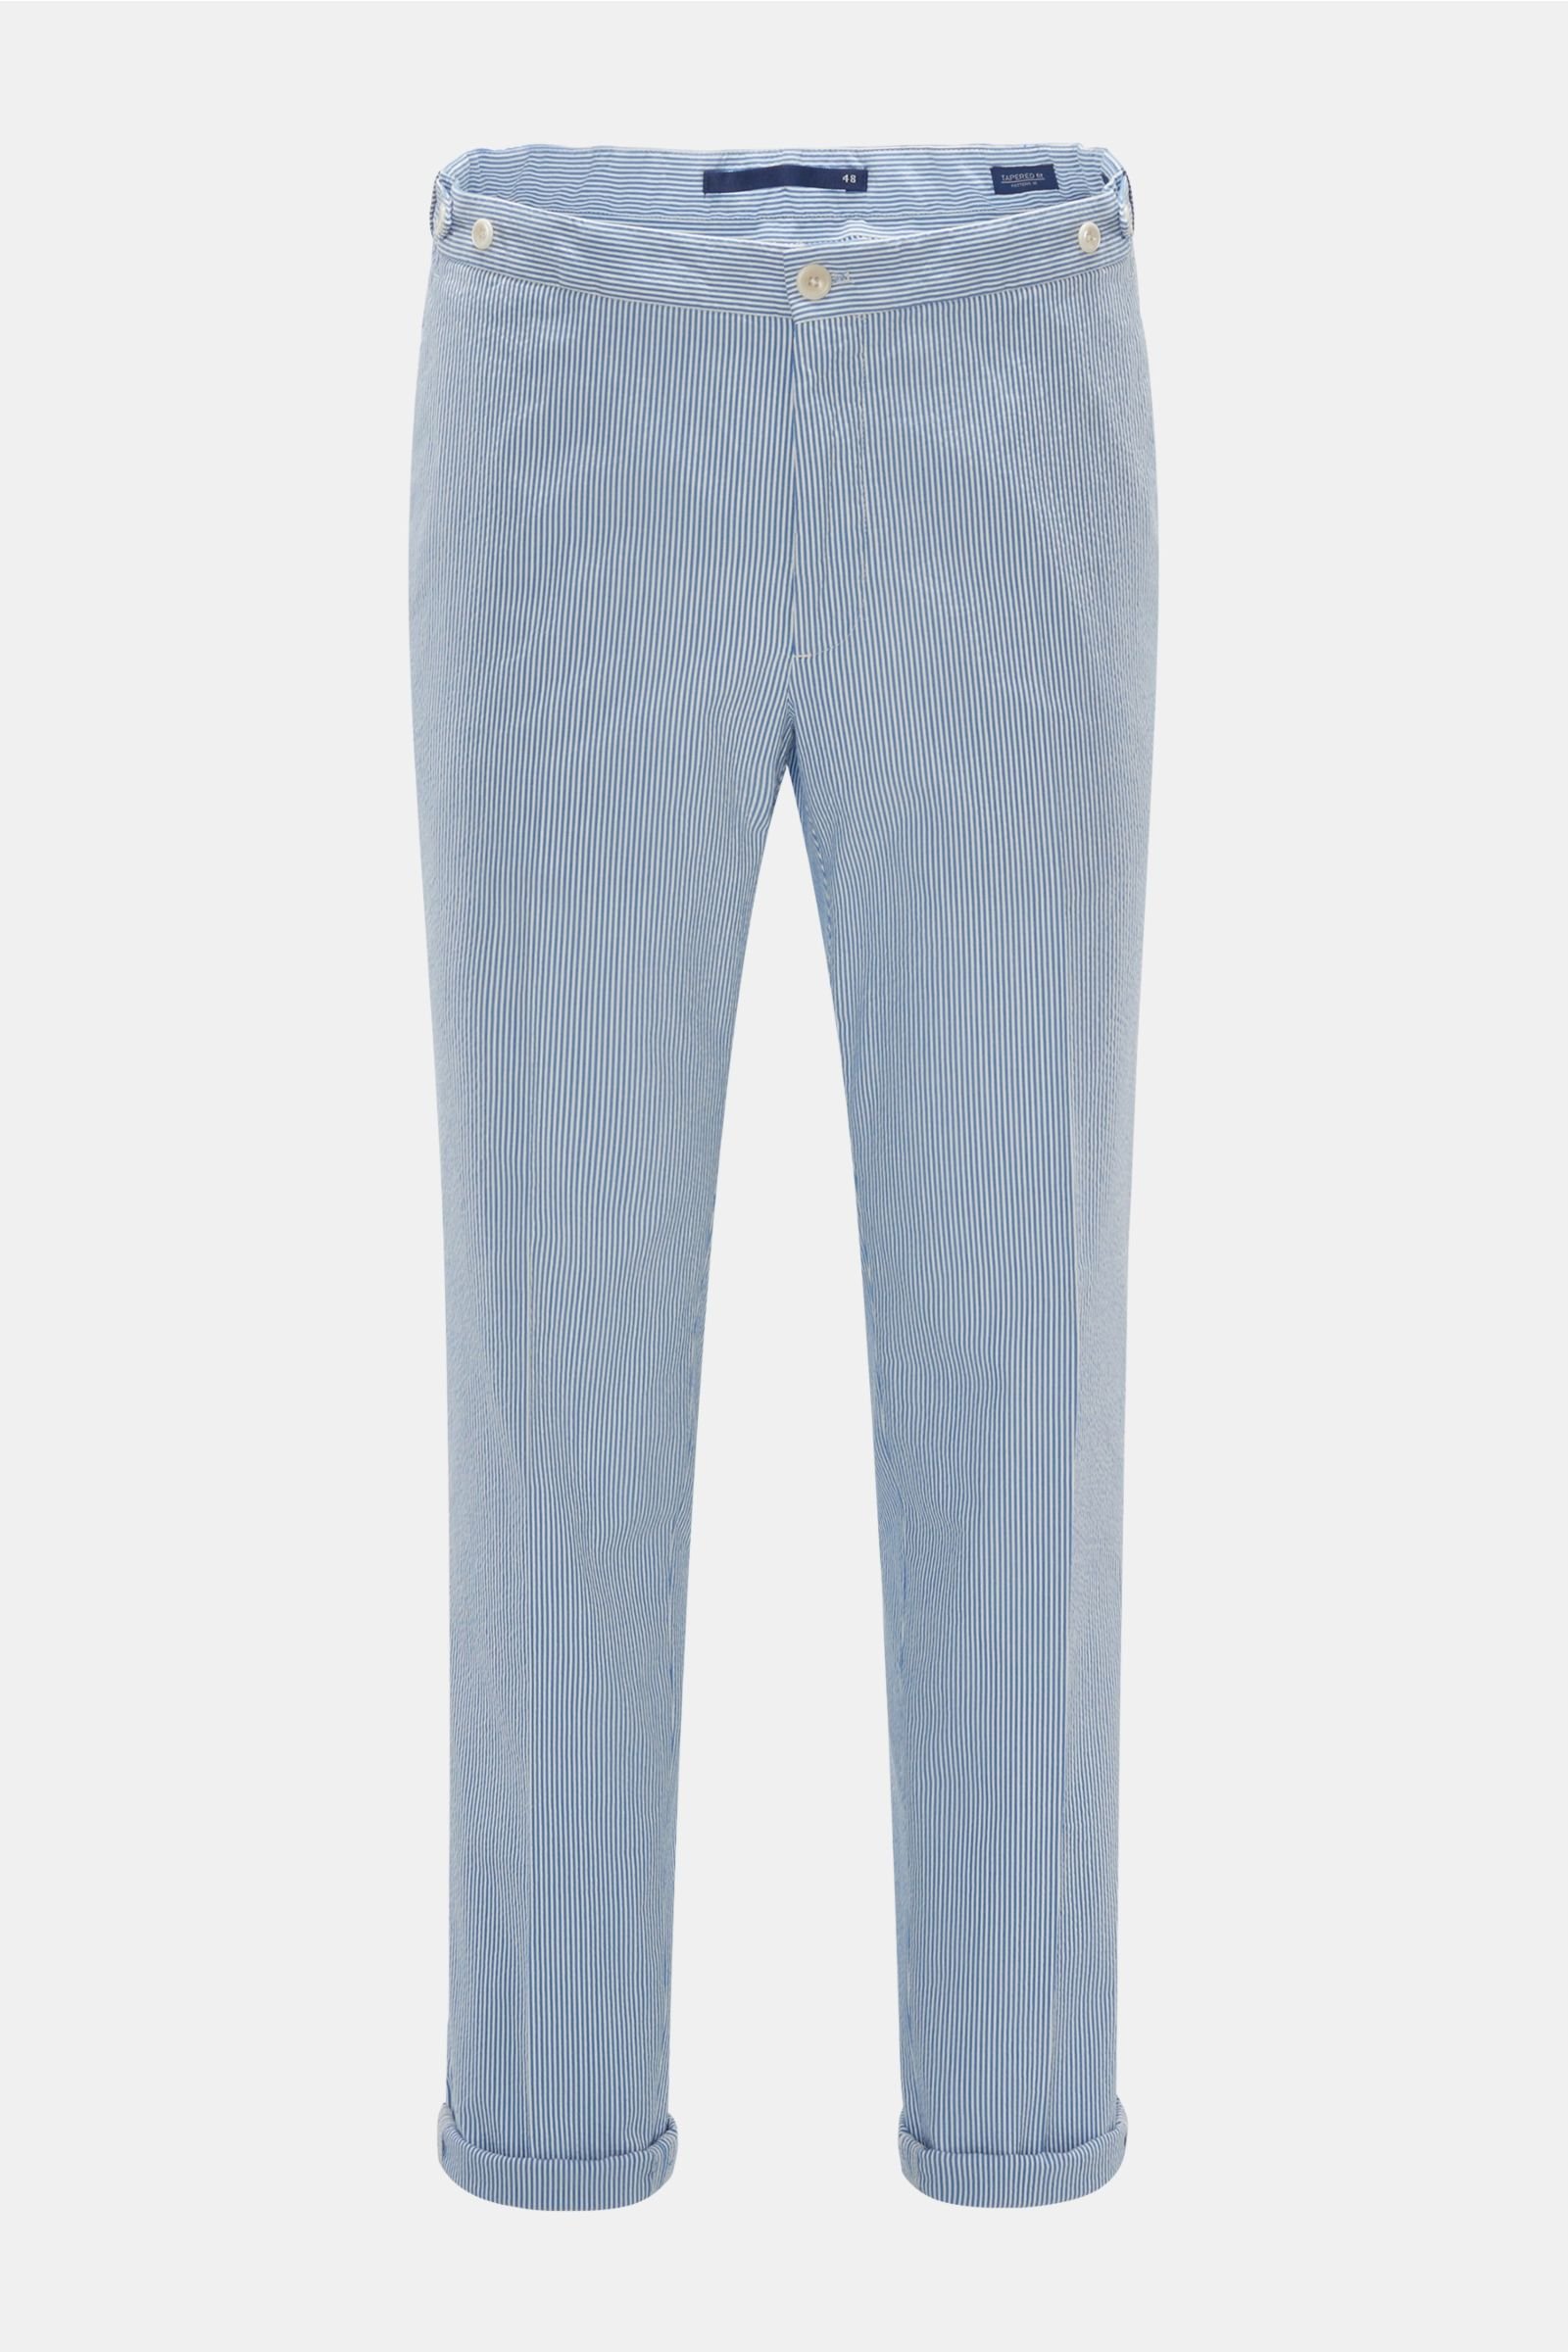 Seersucker trousers 'Tapered Fit' smoky blue/white striped